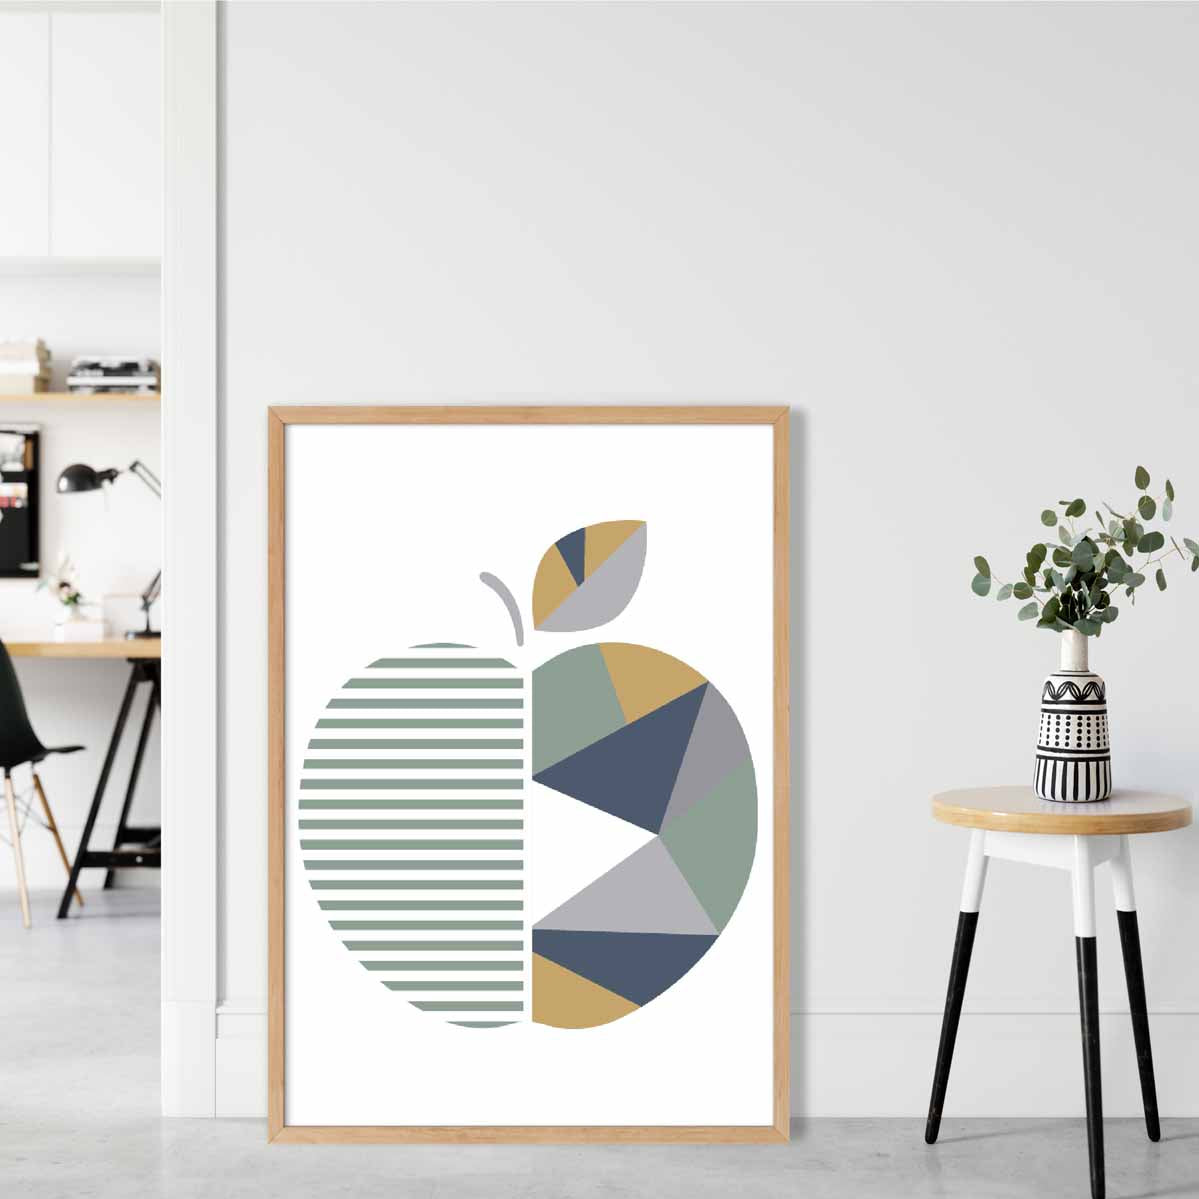 Geometric Fruit Poster of an Apple in Sage Green Blue and Yellow